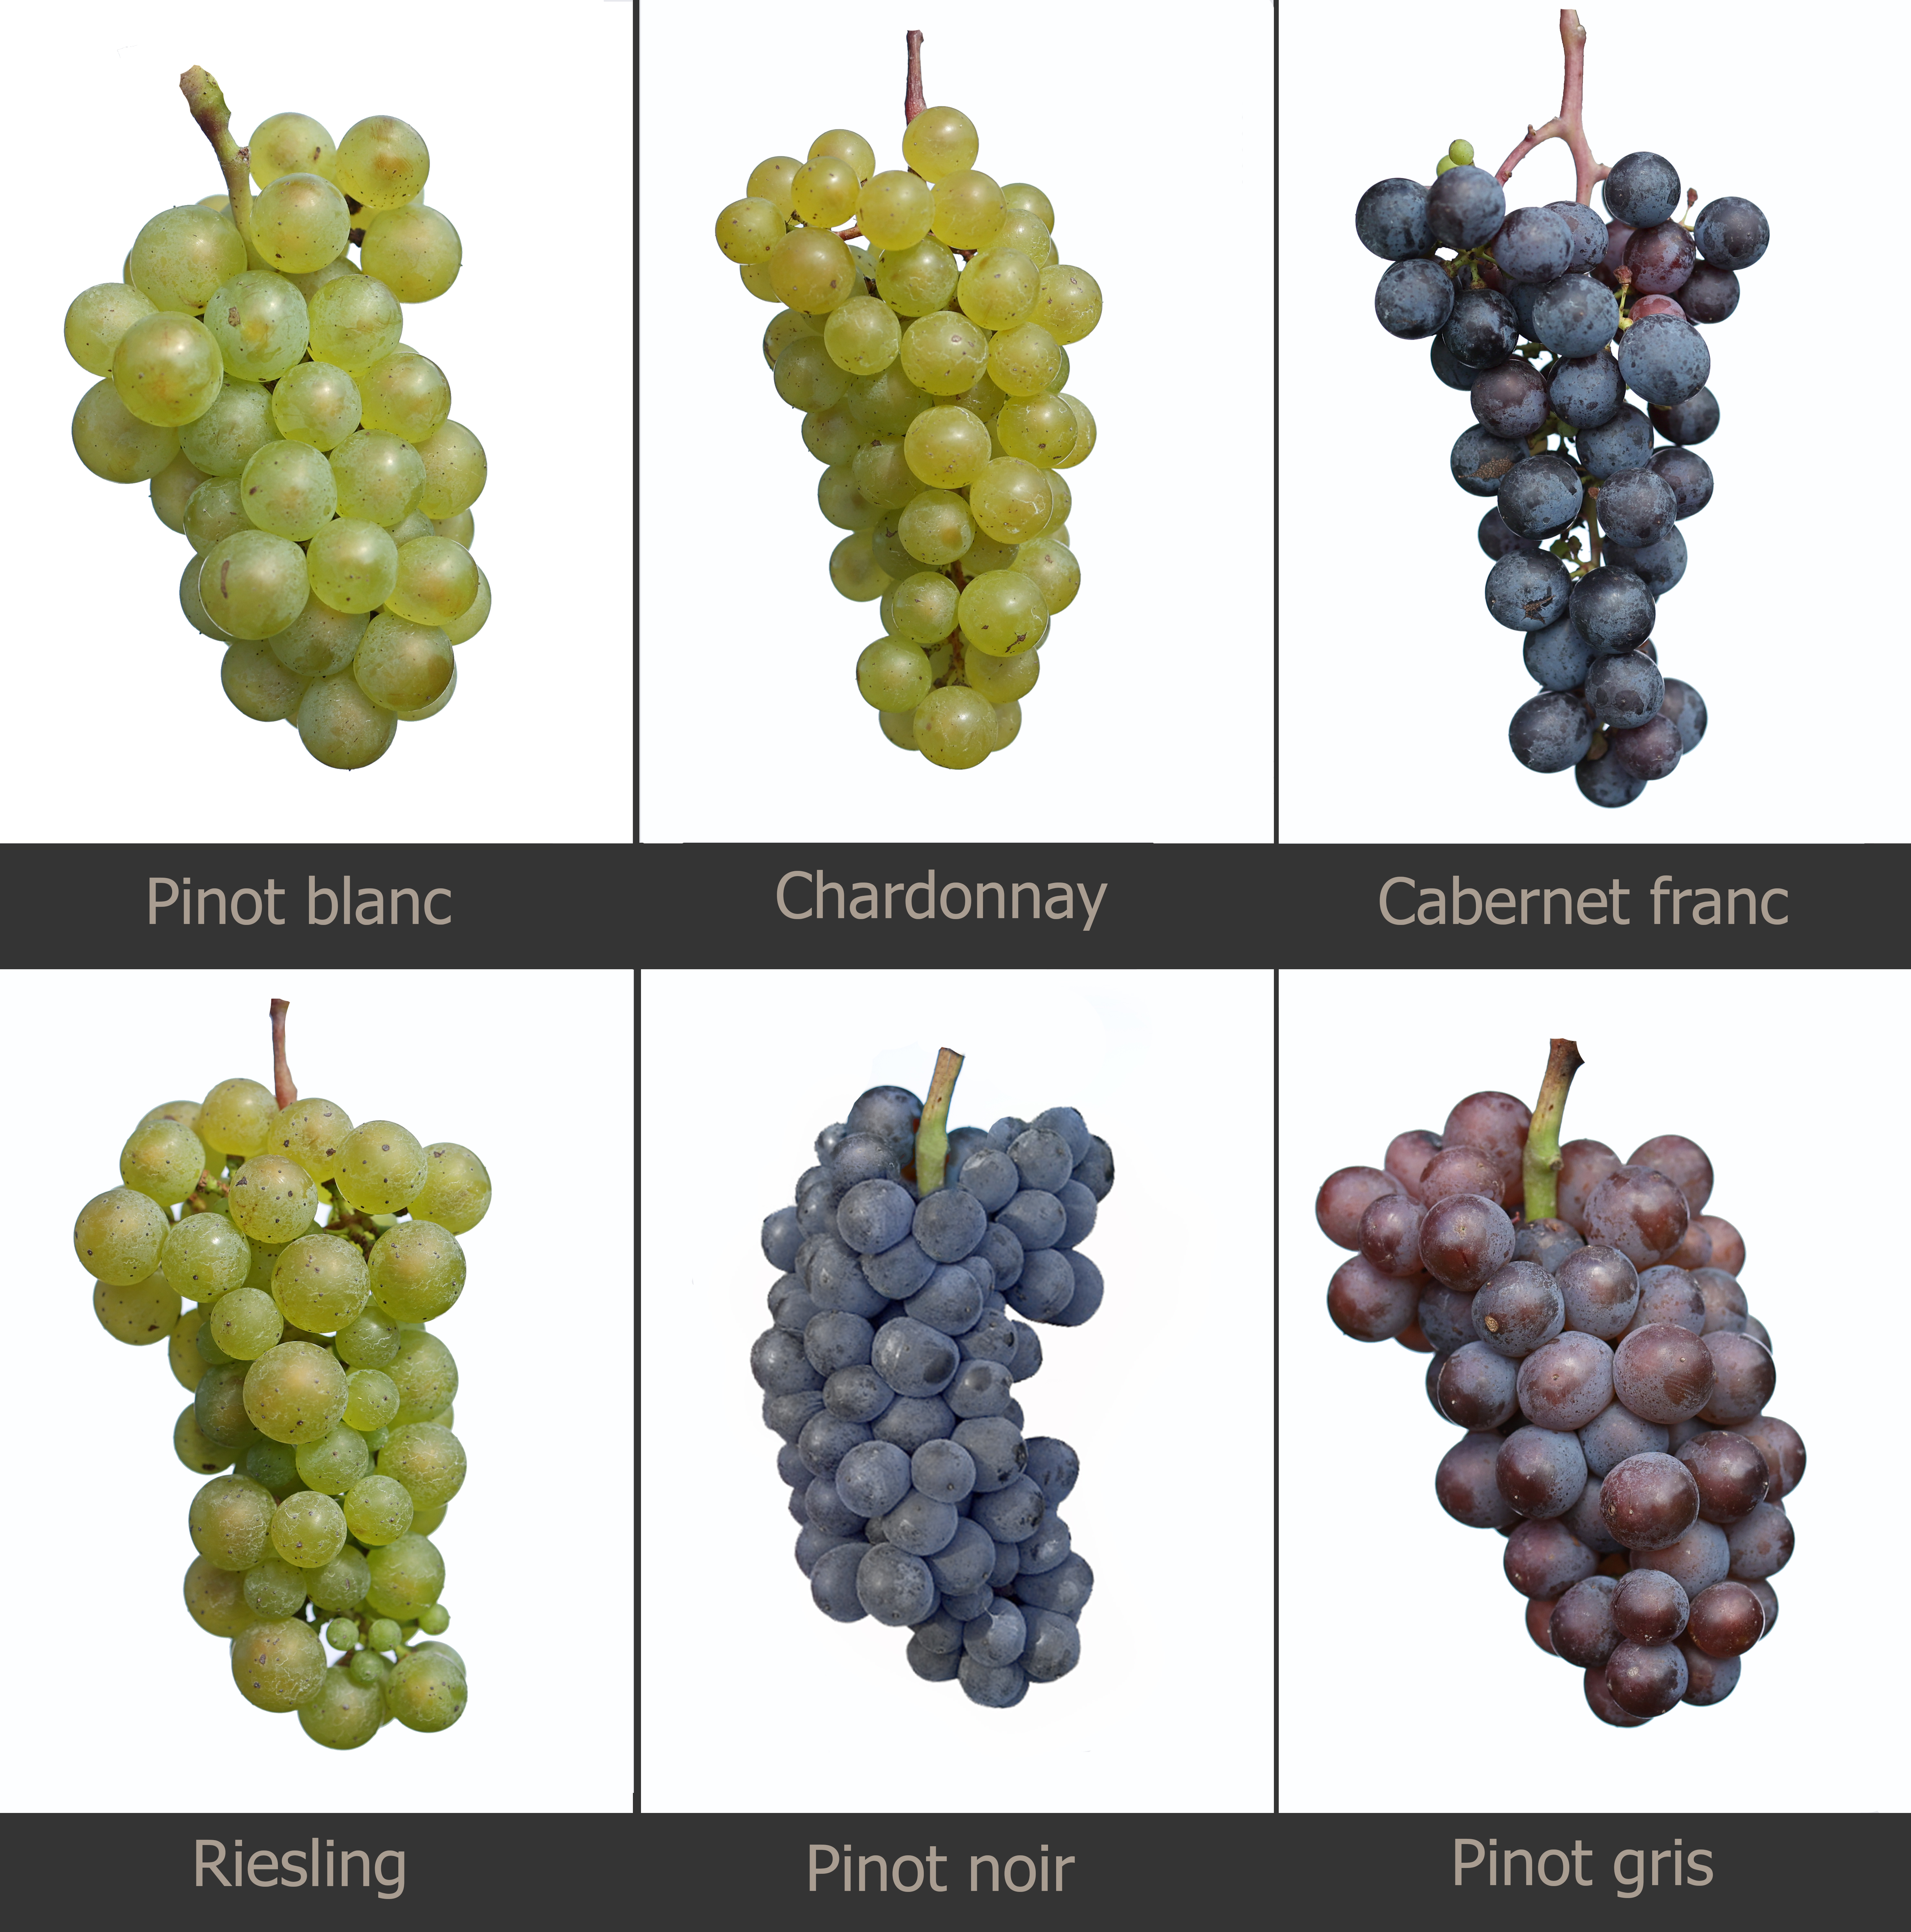 Pictures of different types of grape varieties.